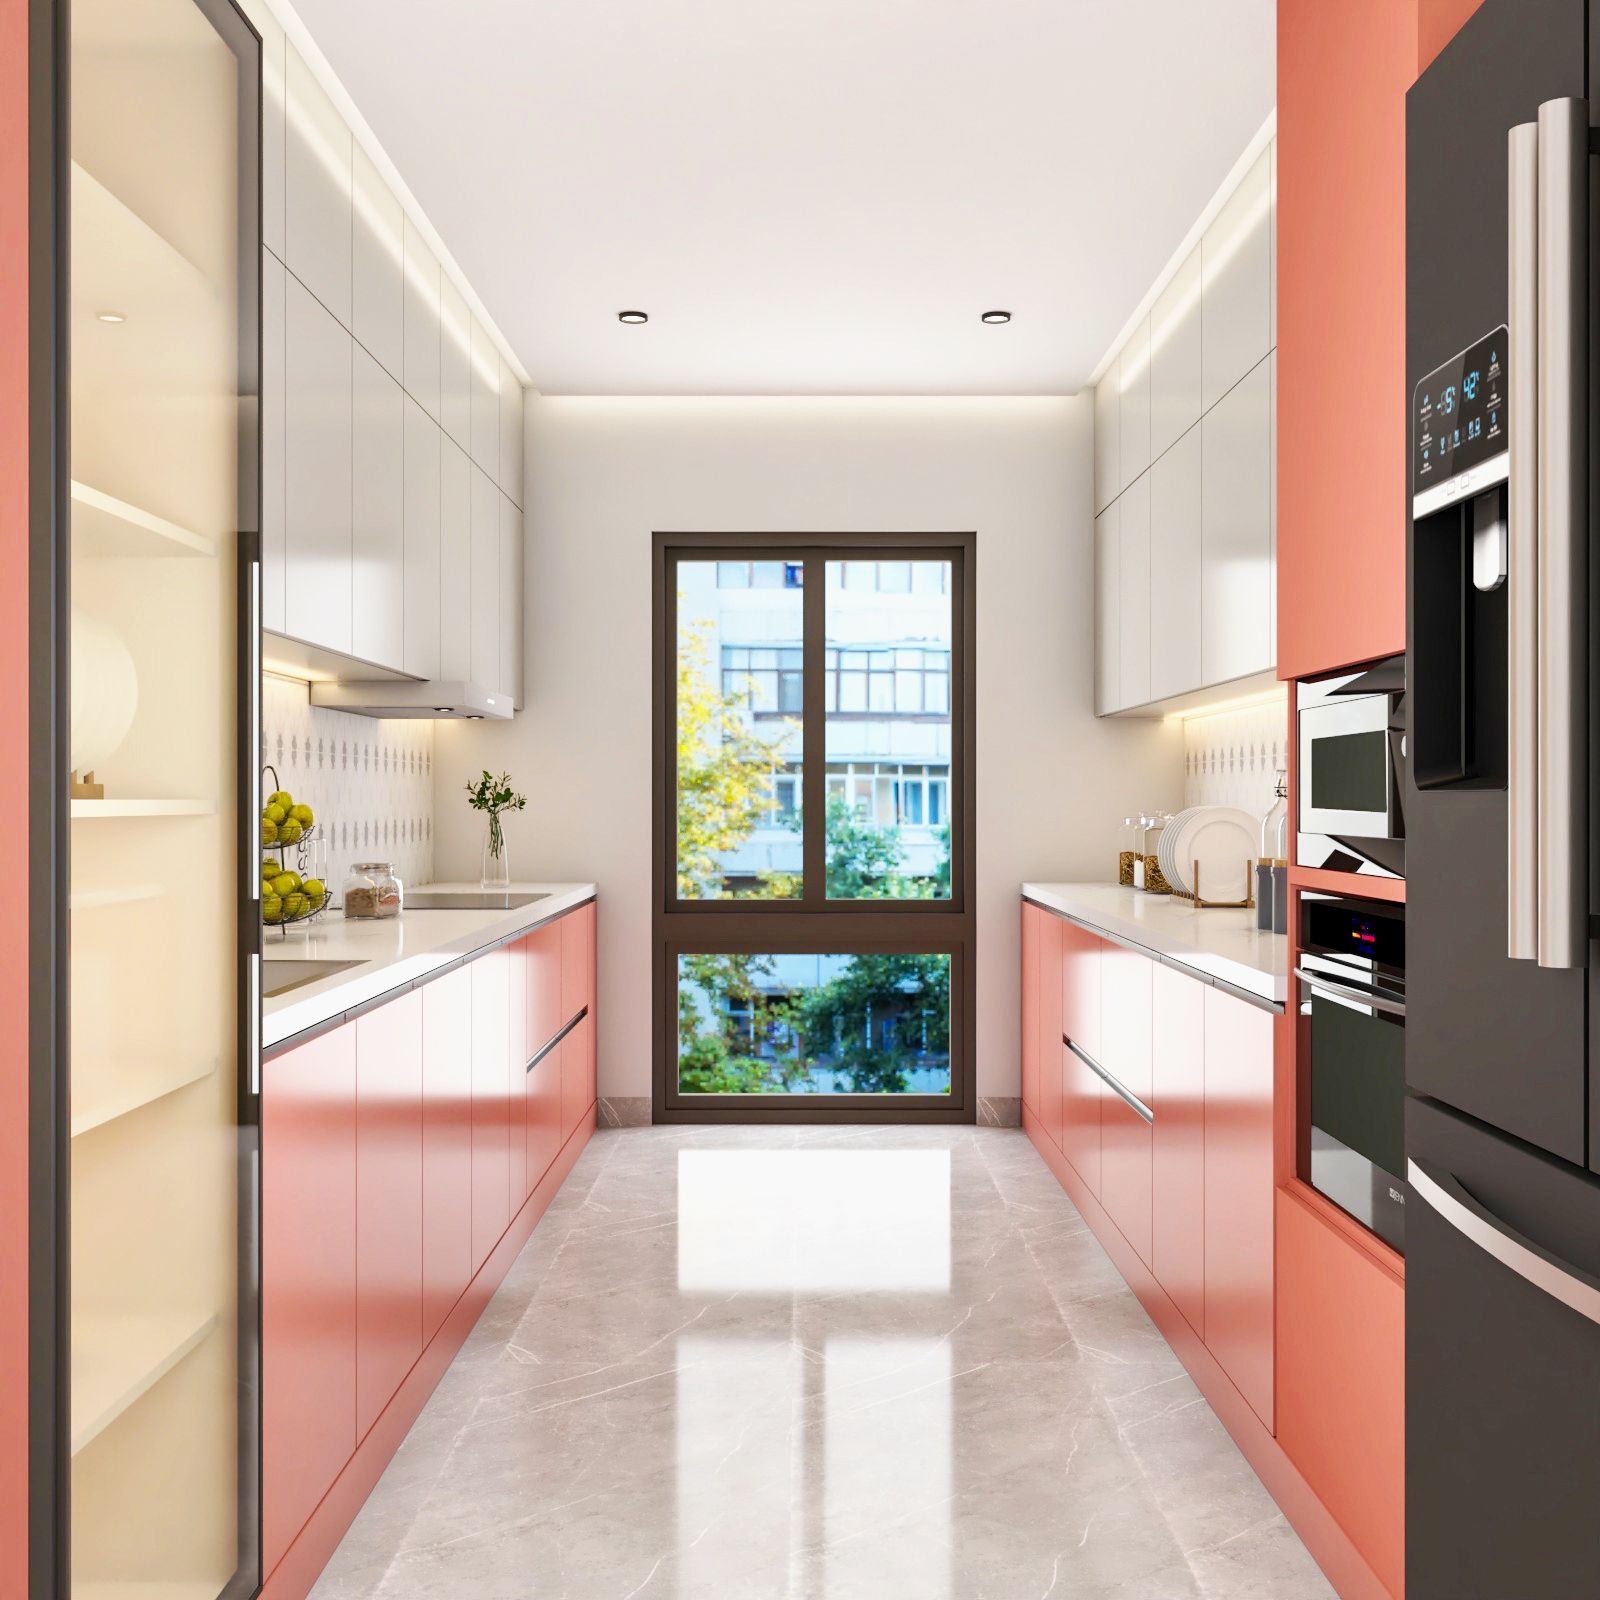 Modern Modular Parallel Kitchen Design With Peach-Toned And White Cabinets